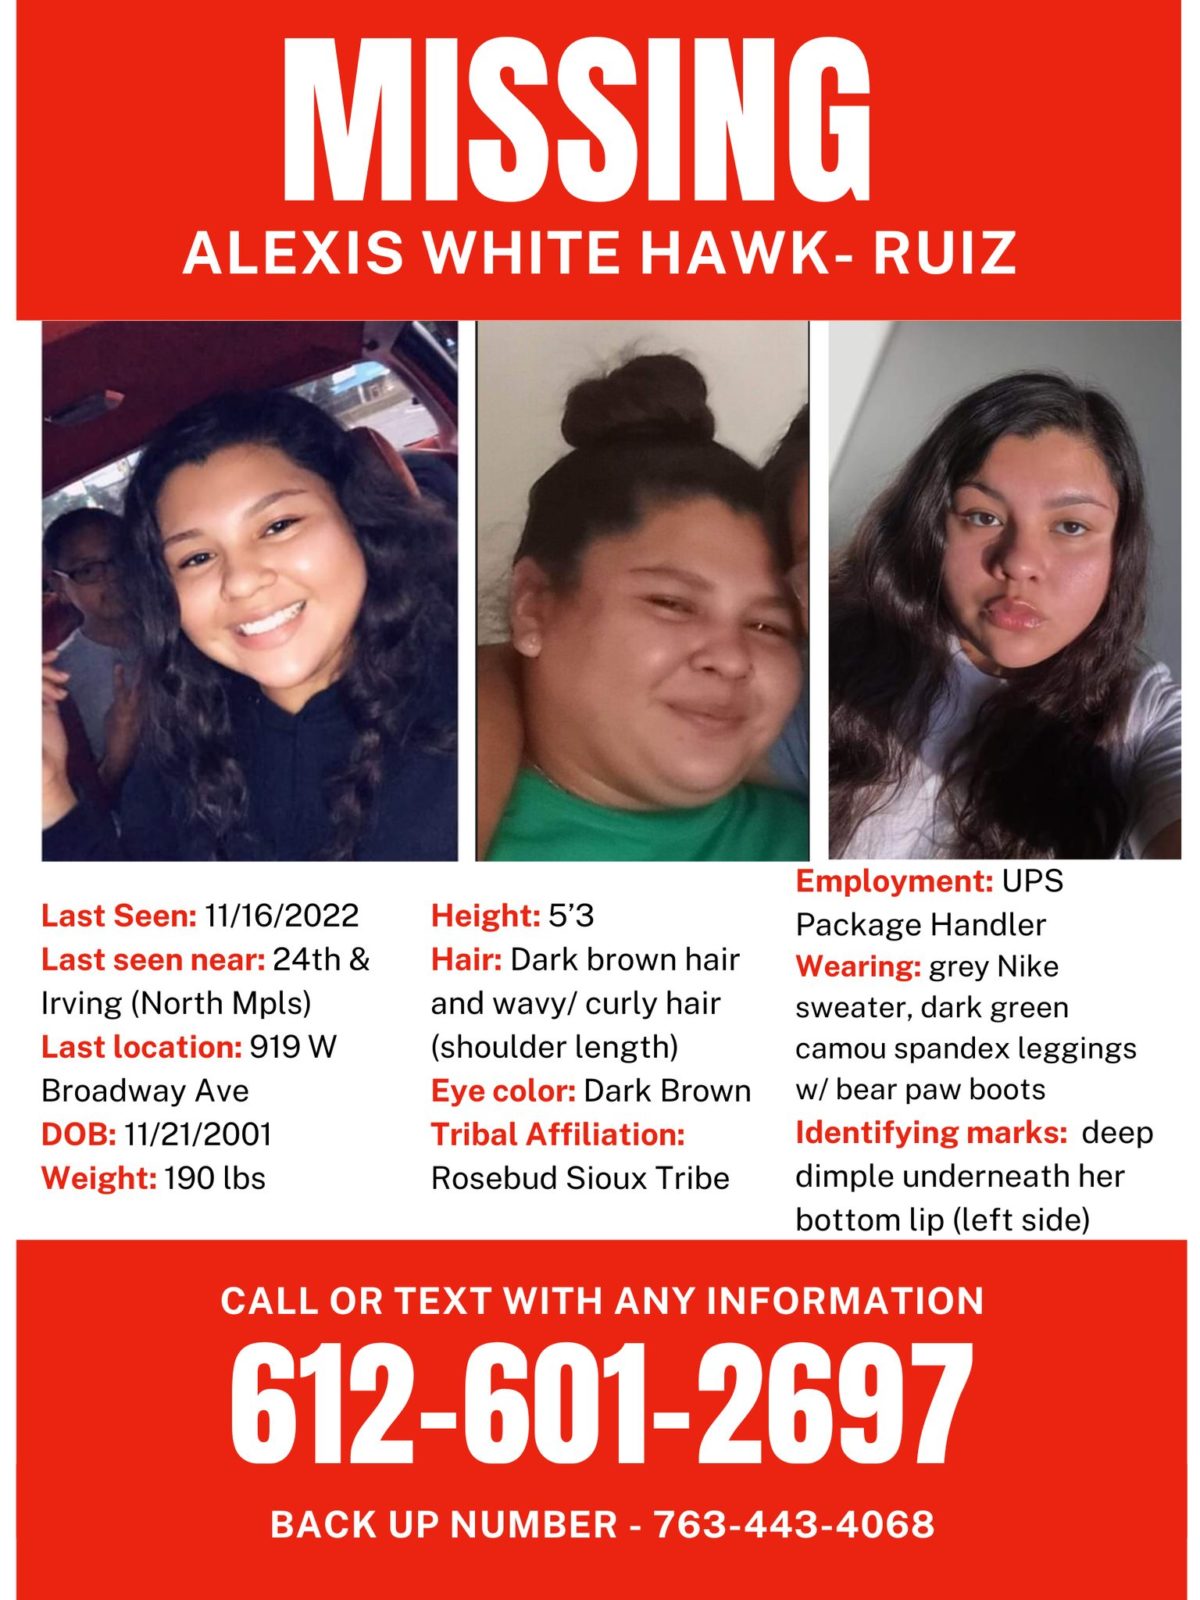 MISSING
Name: Alexis White Hawk- Ruiz
Last Seen: 11/16/2022
Last seen leaving near 24th and Irving
Last known location was 919 W Broadway Ave
DOB: 11/21/2001
Weight: 190 lbs
Height: 5’3
Hair: Dark brown hair and wavy/ curly hair (shoulder length)
Eye color: Dark Brown
Tribal Affiliation: Rosebud Sioux Tribe
Contact # 612-601-2697 and back up # 763-443-4068